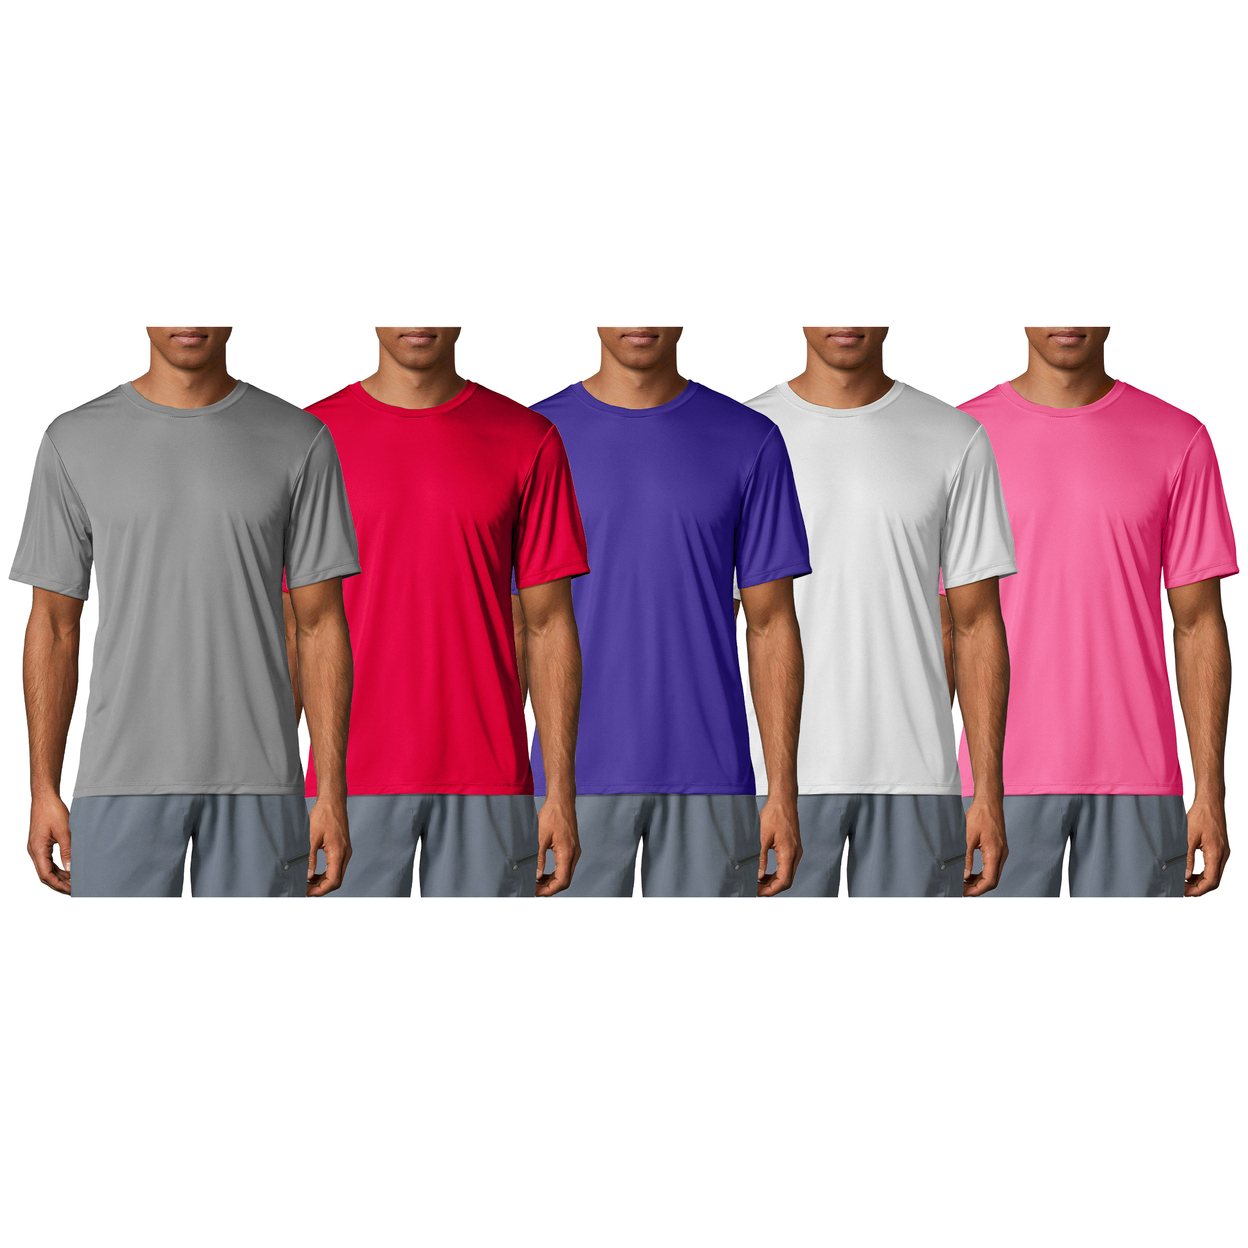 Multi-Pack: Men's Moisture Wicking Cool Dri-Fit Performance Short Sleeve Crew Neck T-Shirts - 1-pack, Large